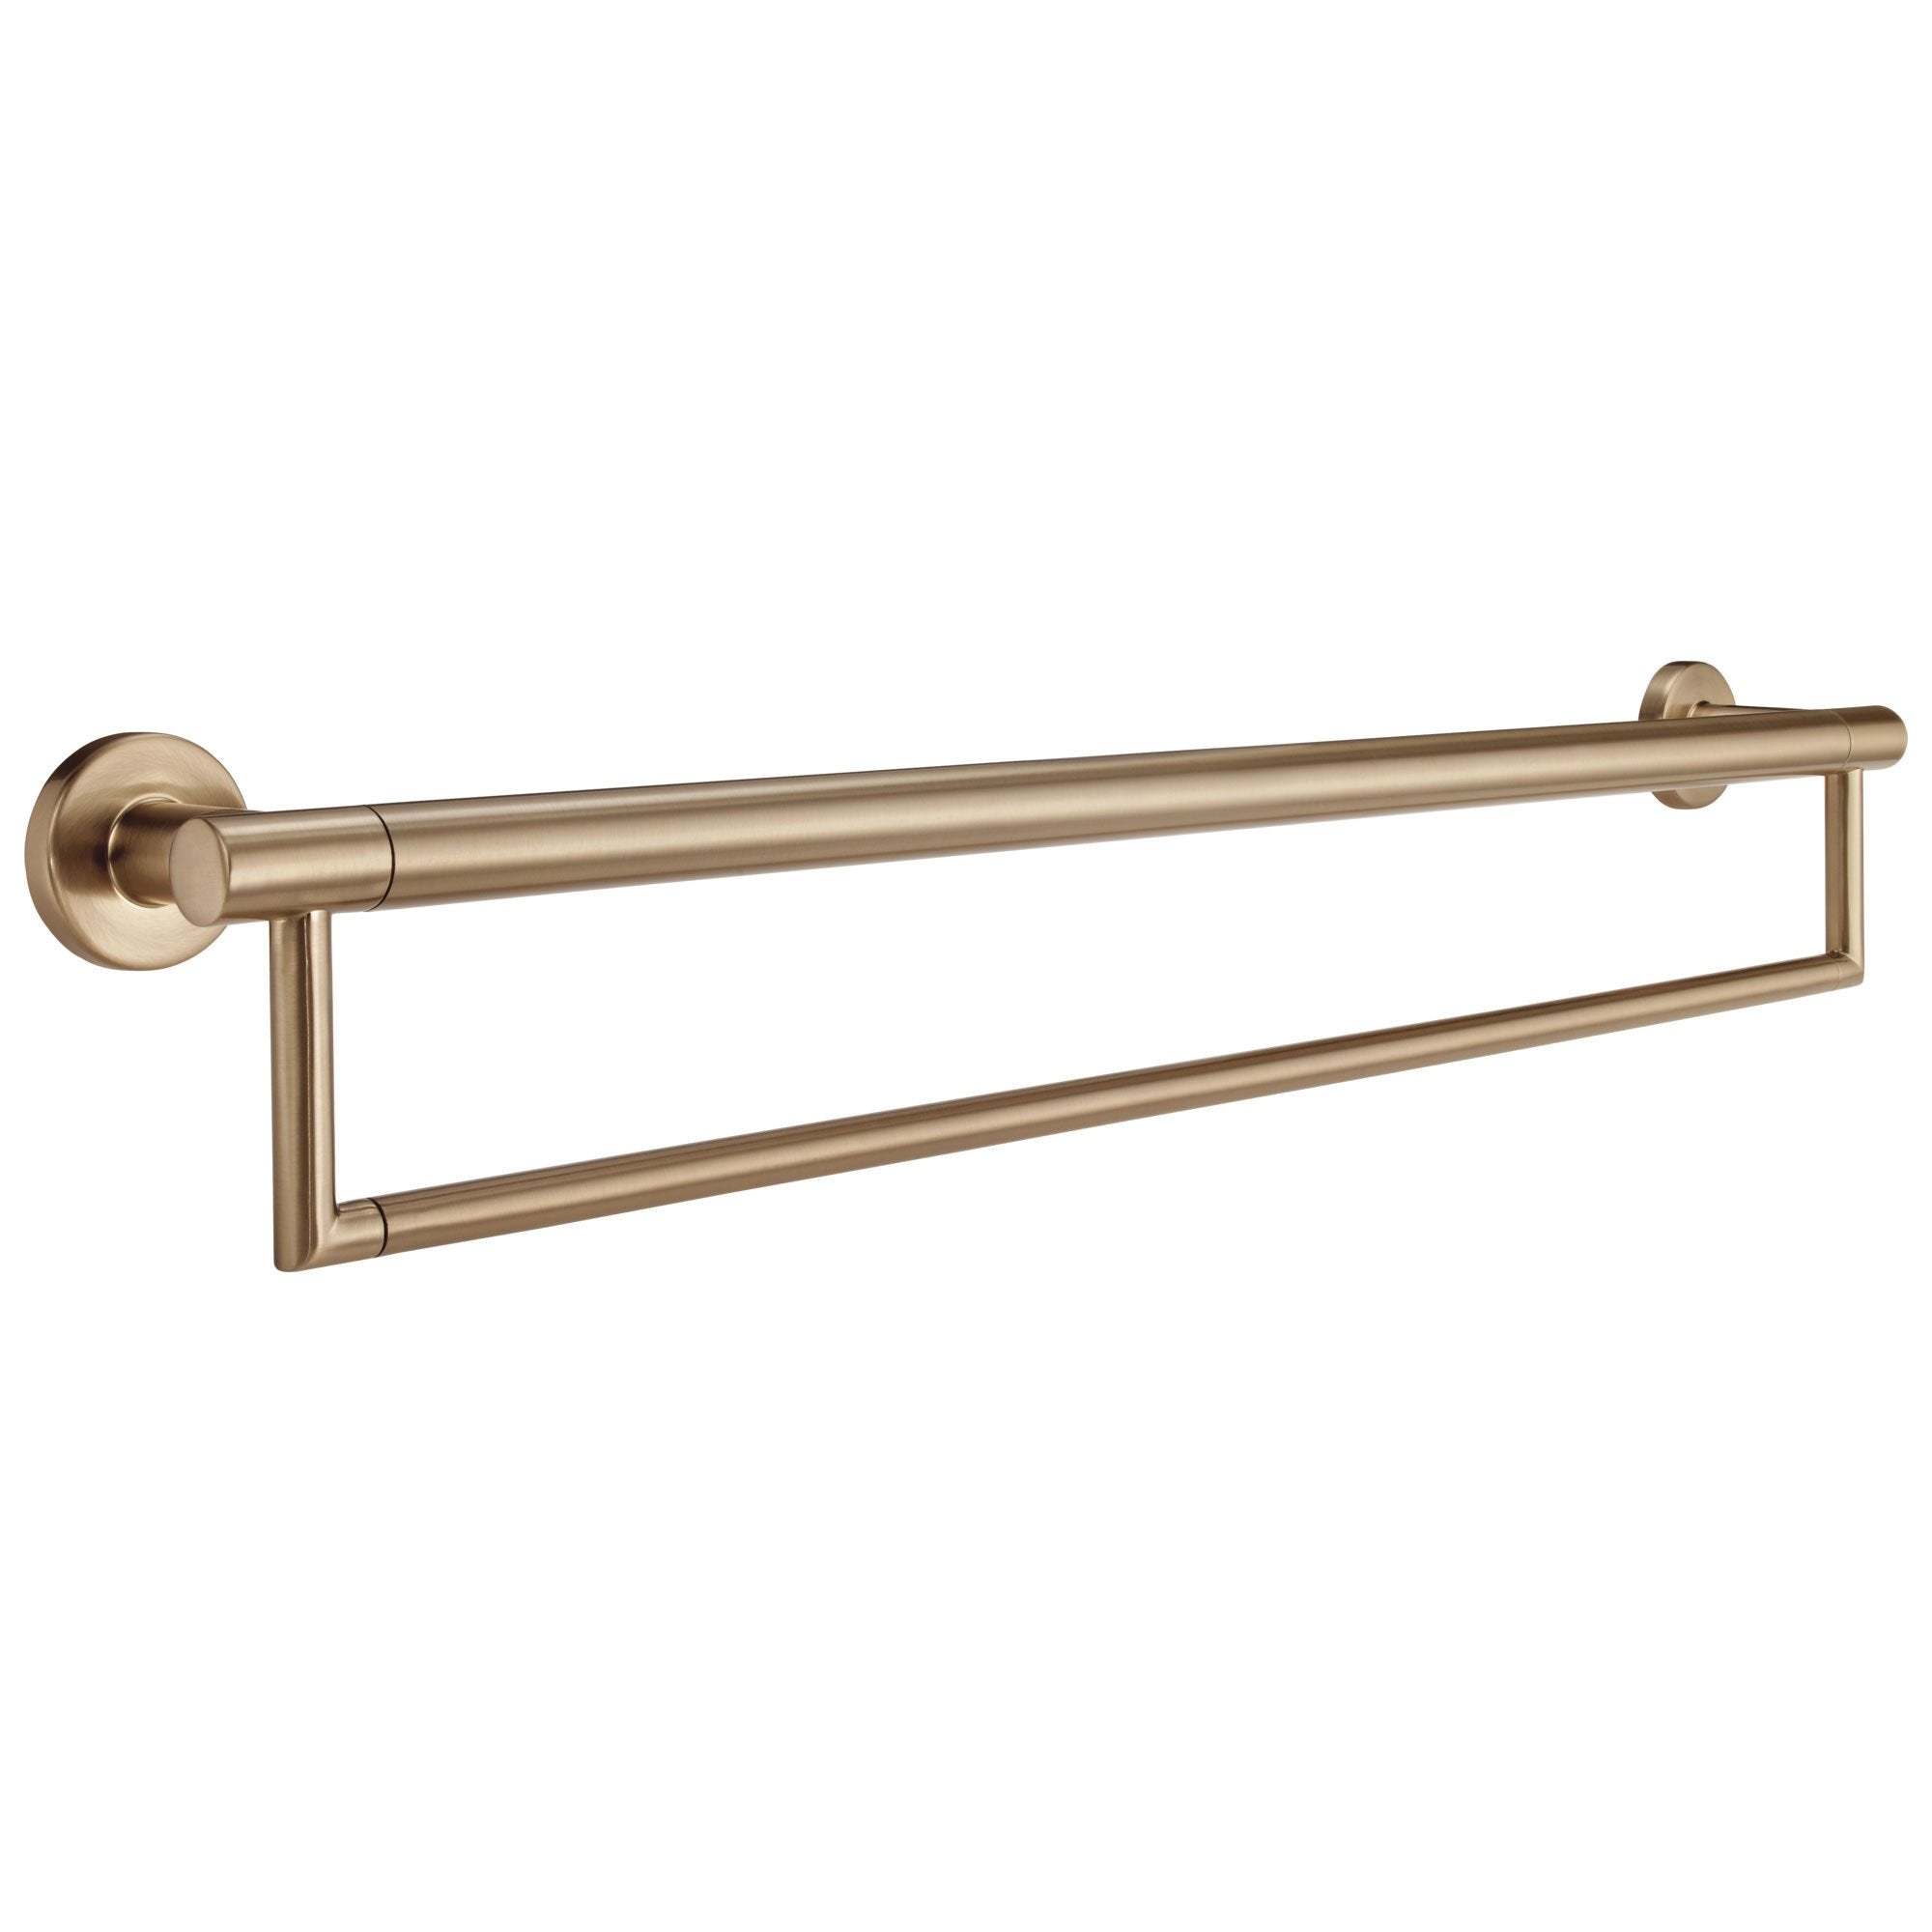 Delta Bath Safety Collection Champagne Bronze Finish Contemporary Style 24" Towel Bar with Assist Grab Bar D41519CZ